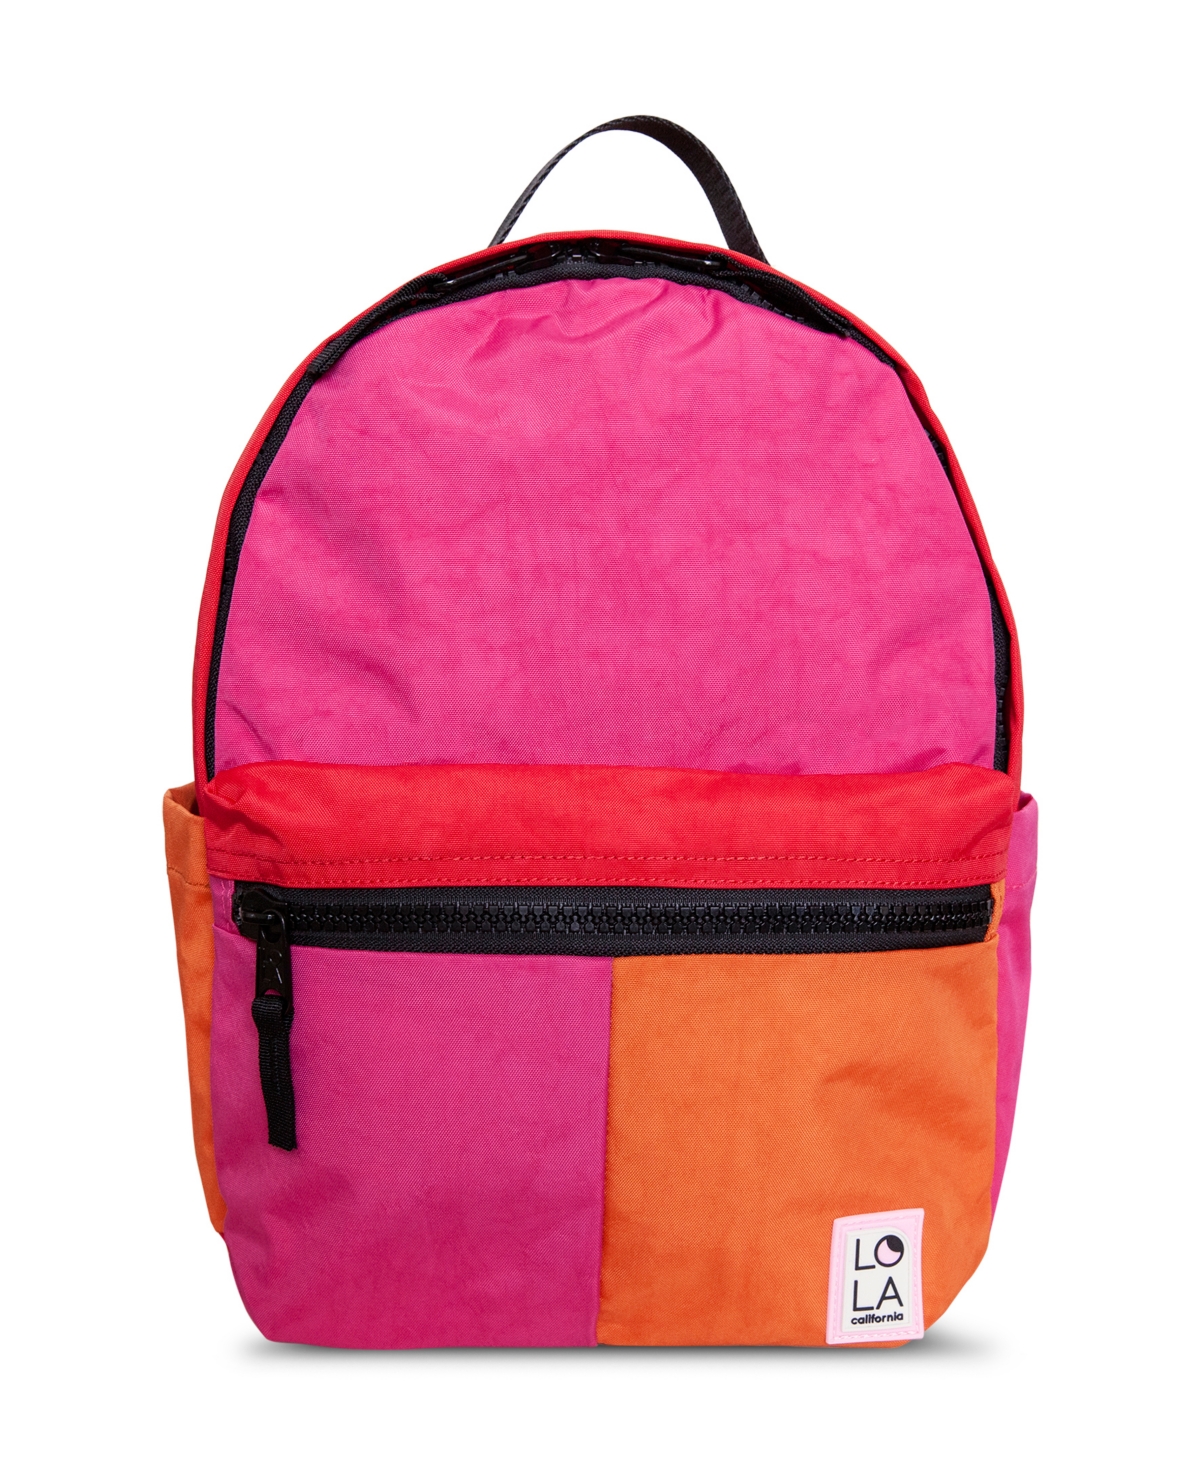 Lola Women's Small Backpack